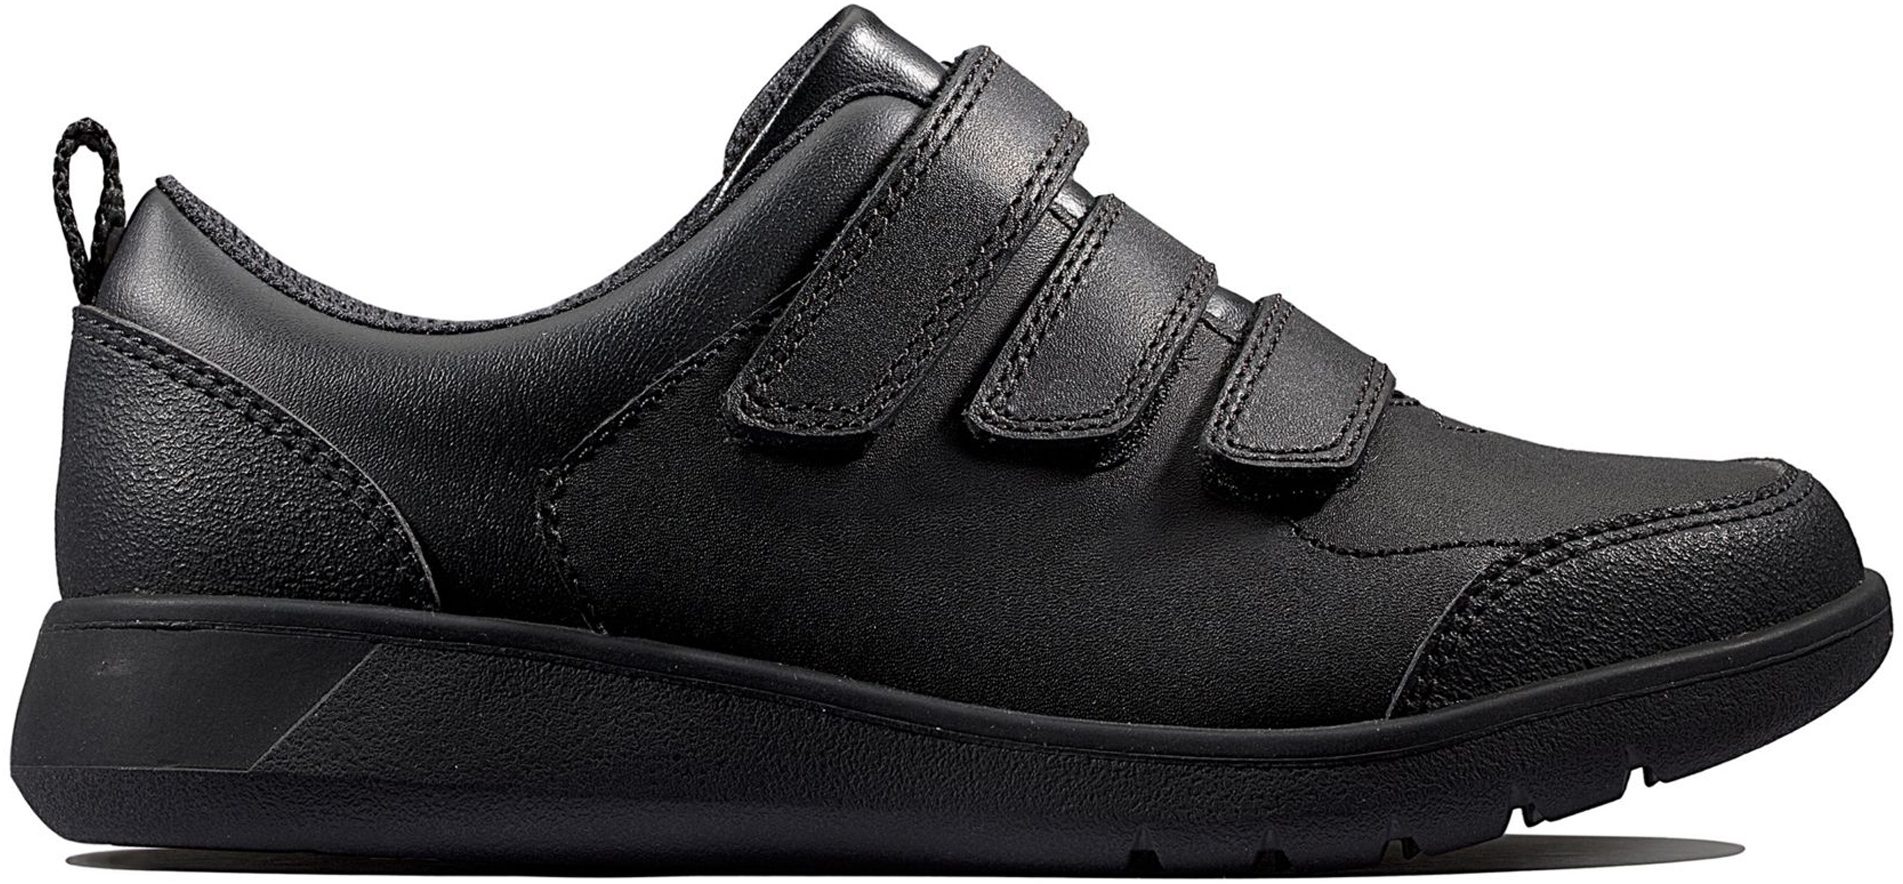 Clarks Scape Sky Youth Black Leather 26145581 - Boys School Shoes ...